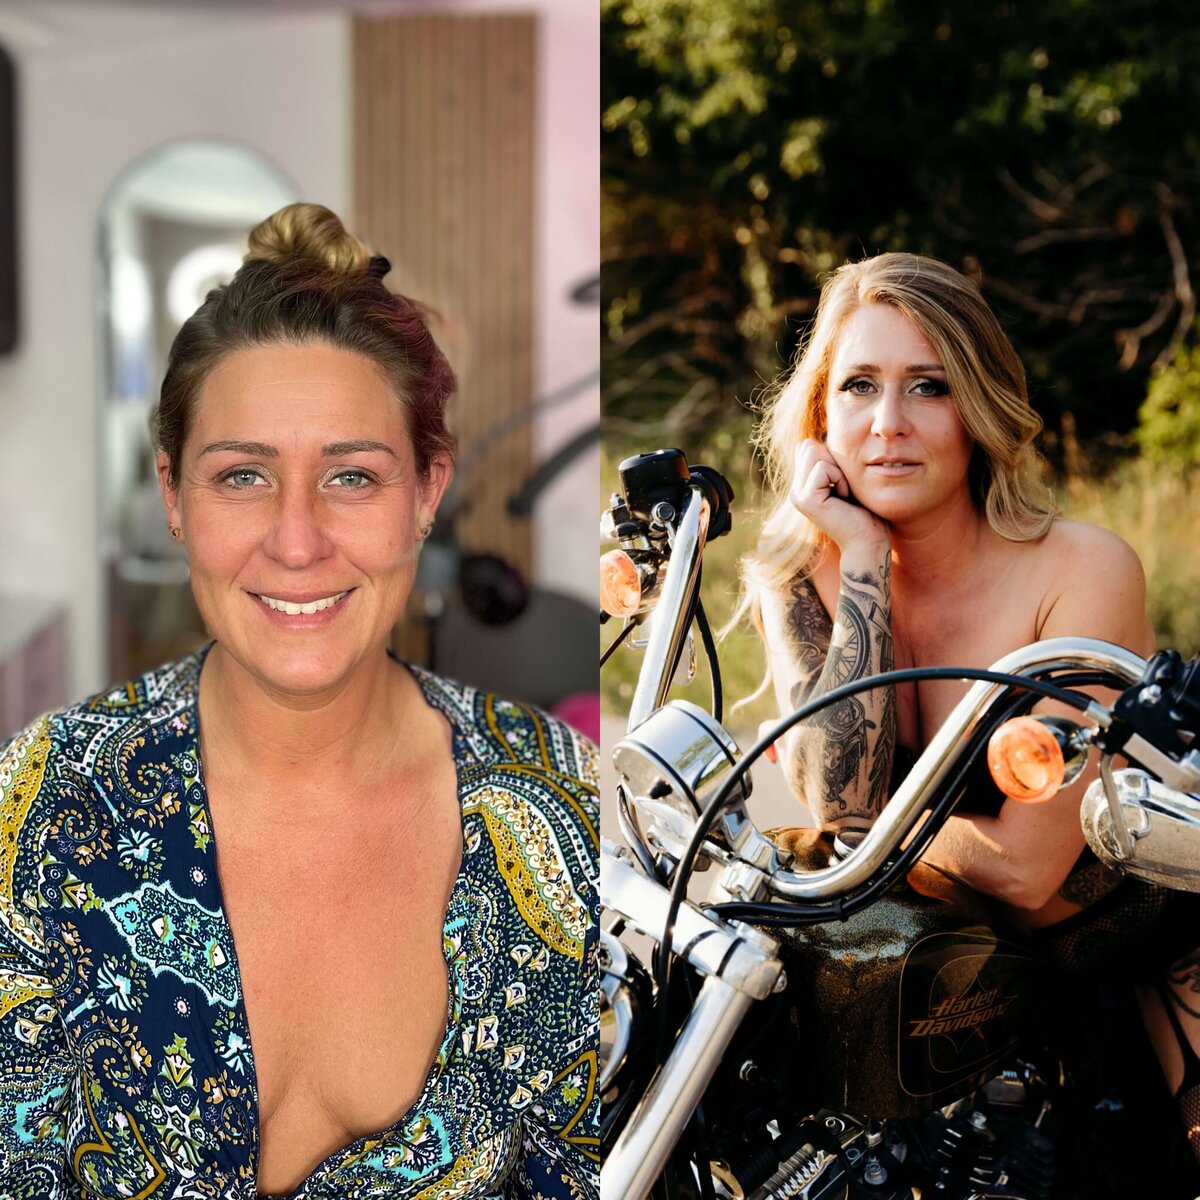 image of a woman without makeup next to an image of same woman all dolled up on a motorcycle captured by Wisconsin boudoir photographer Ashley Kalbus